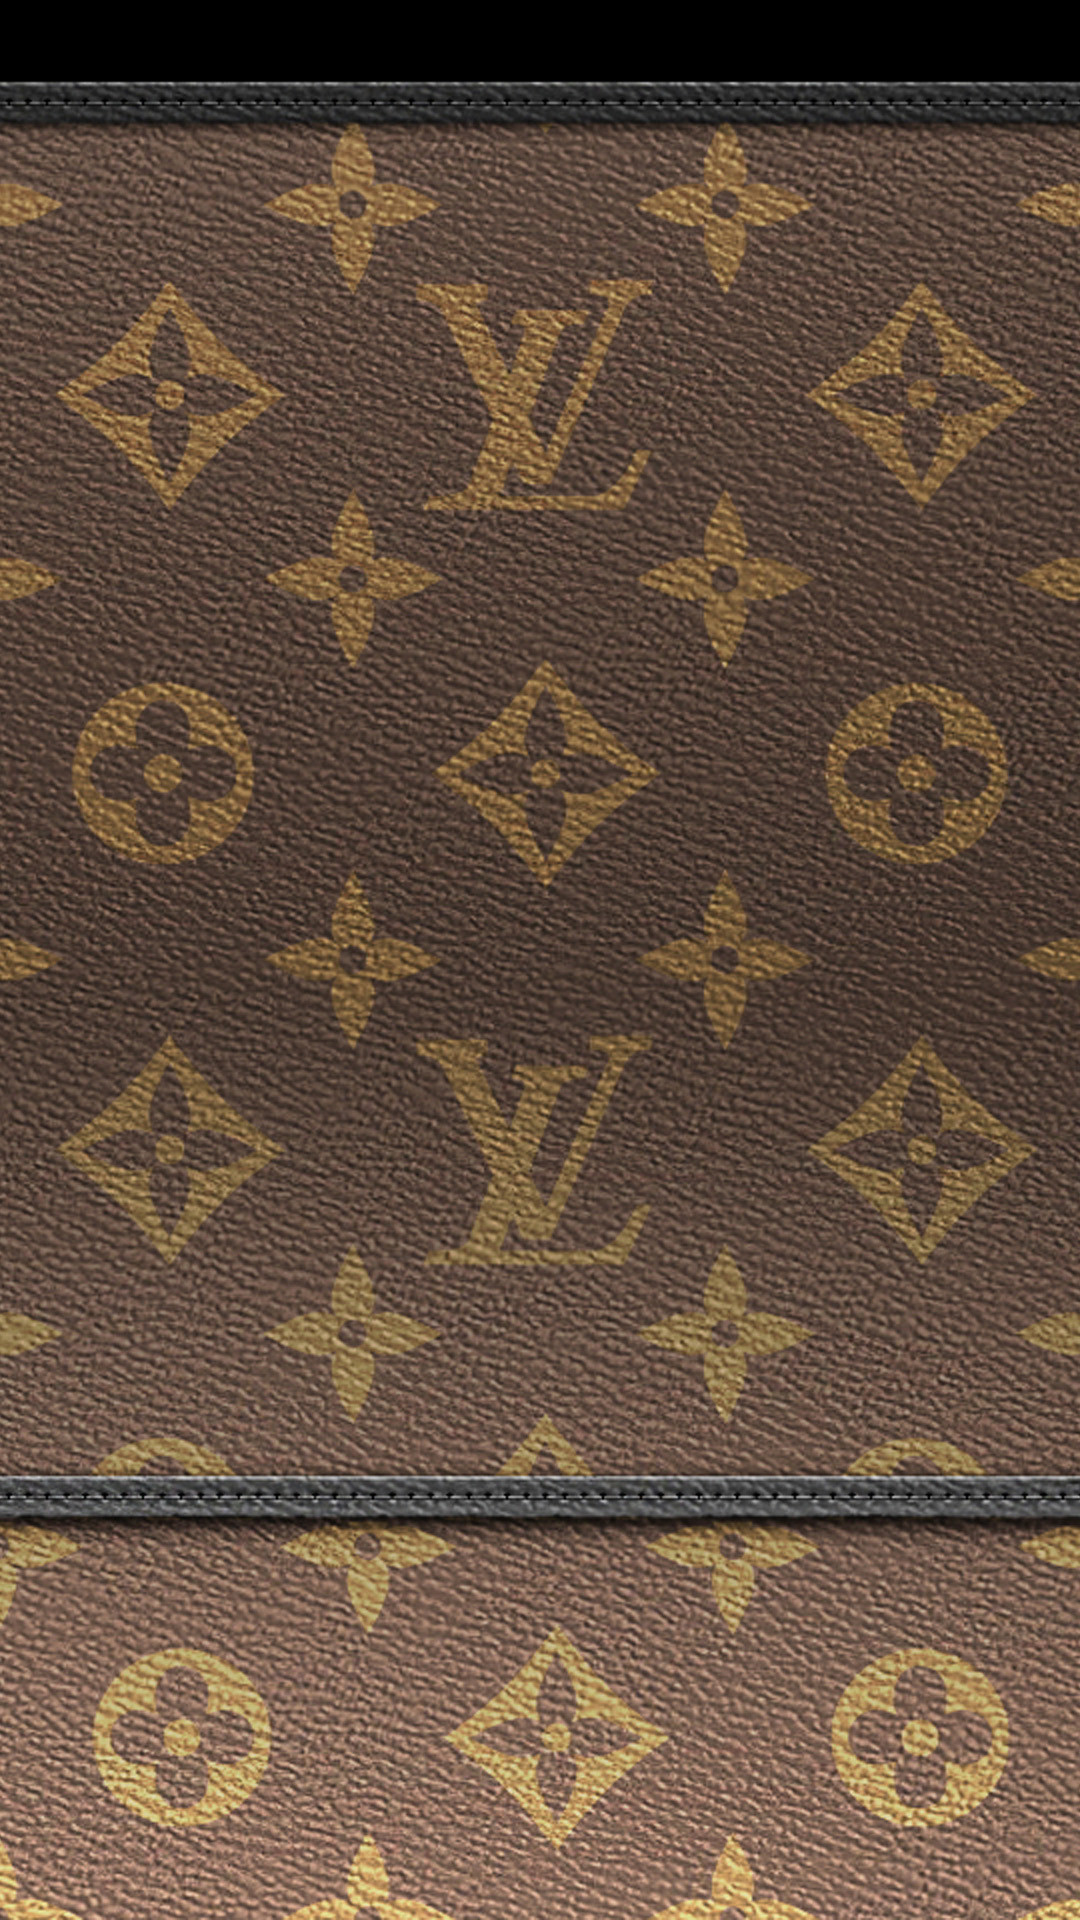 1080x1920 Lv bag Wallpapers for Galaxy S5